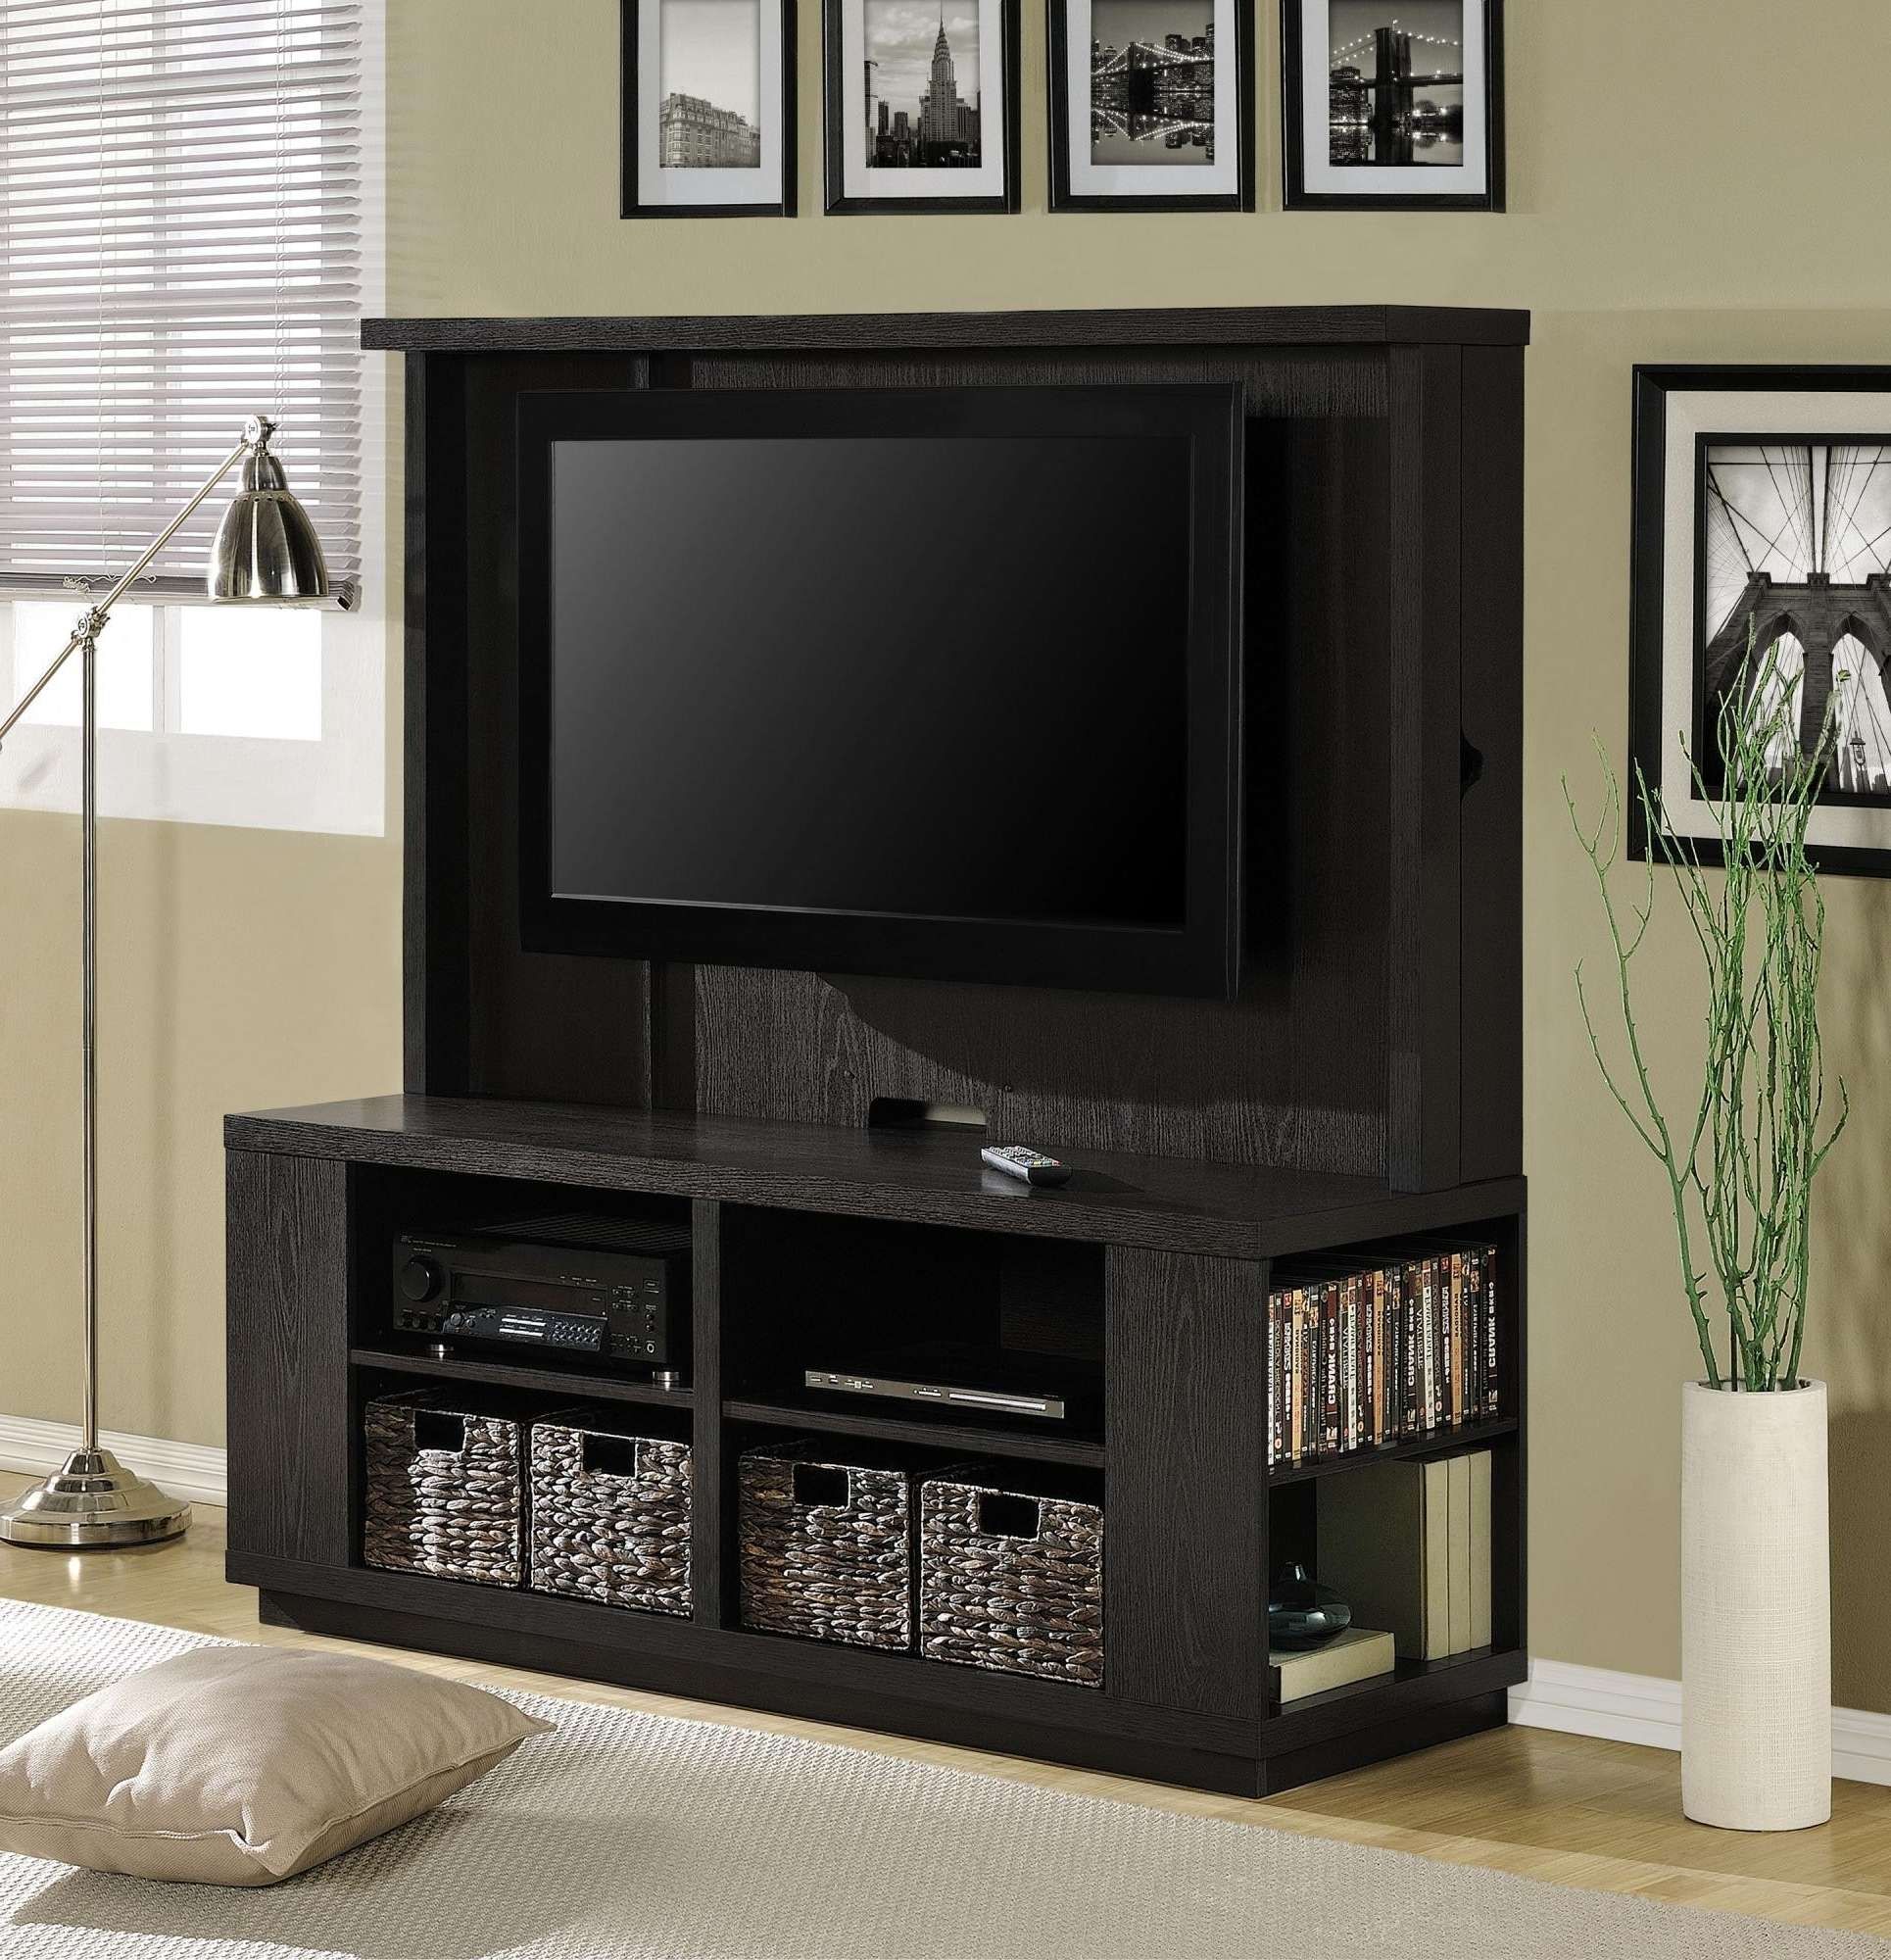 Free Ship Furnishings | 60" Flat Panel Tv Stand Dylan Hec With Regarding Tv Stands With Baskets (View 1 of 15)